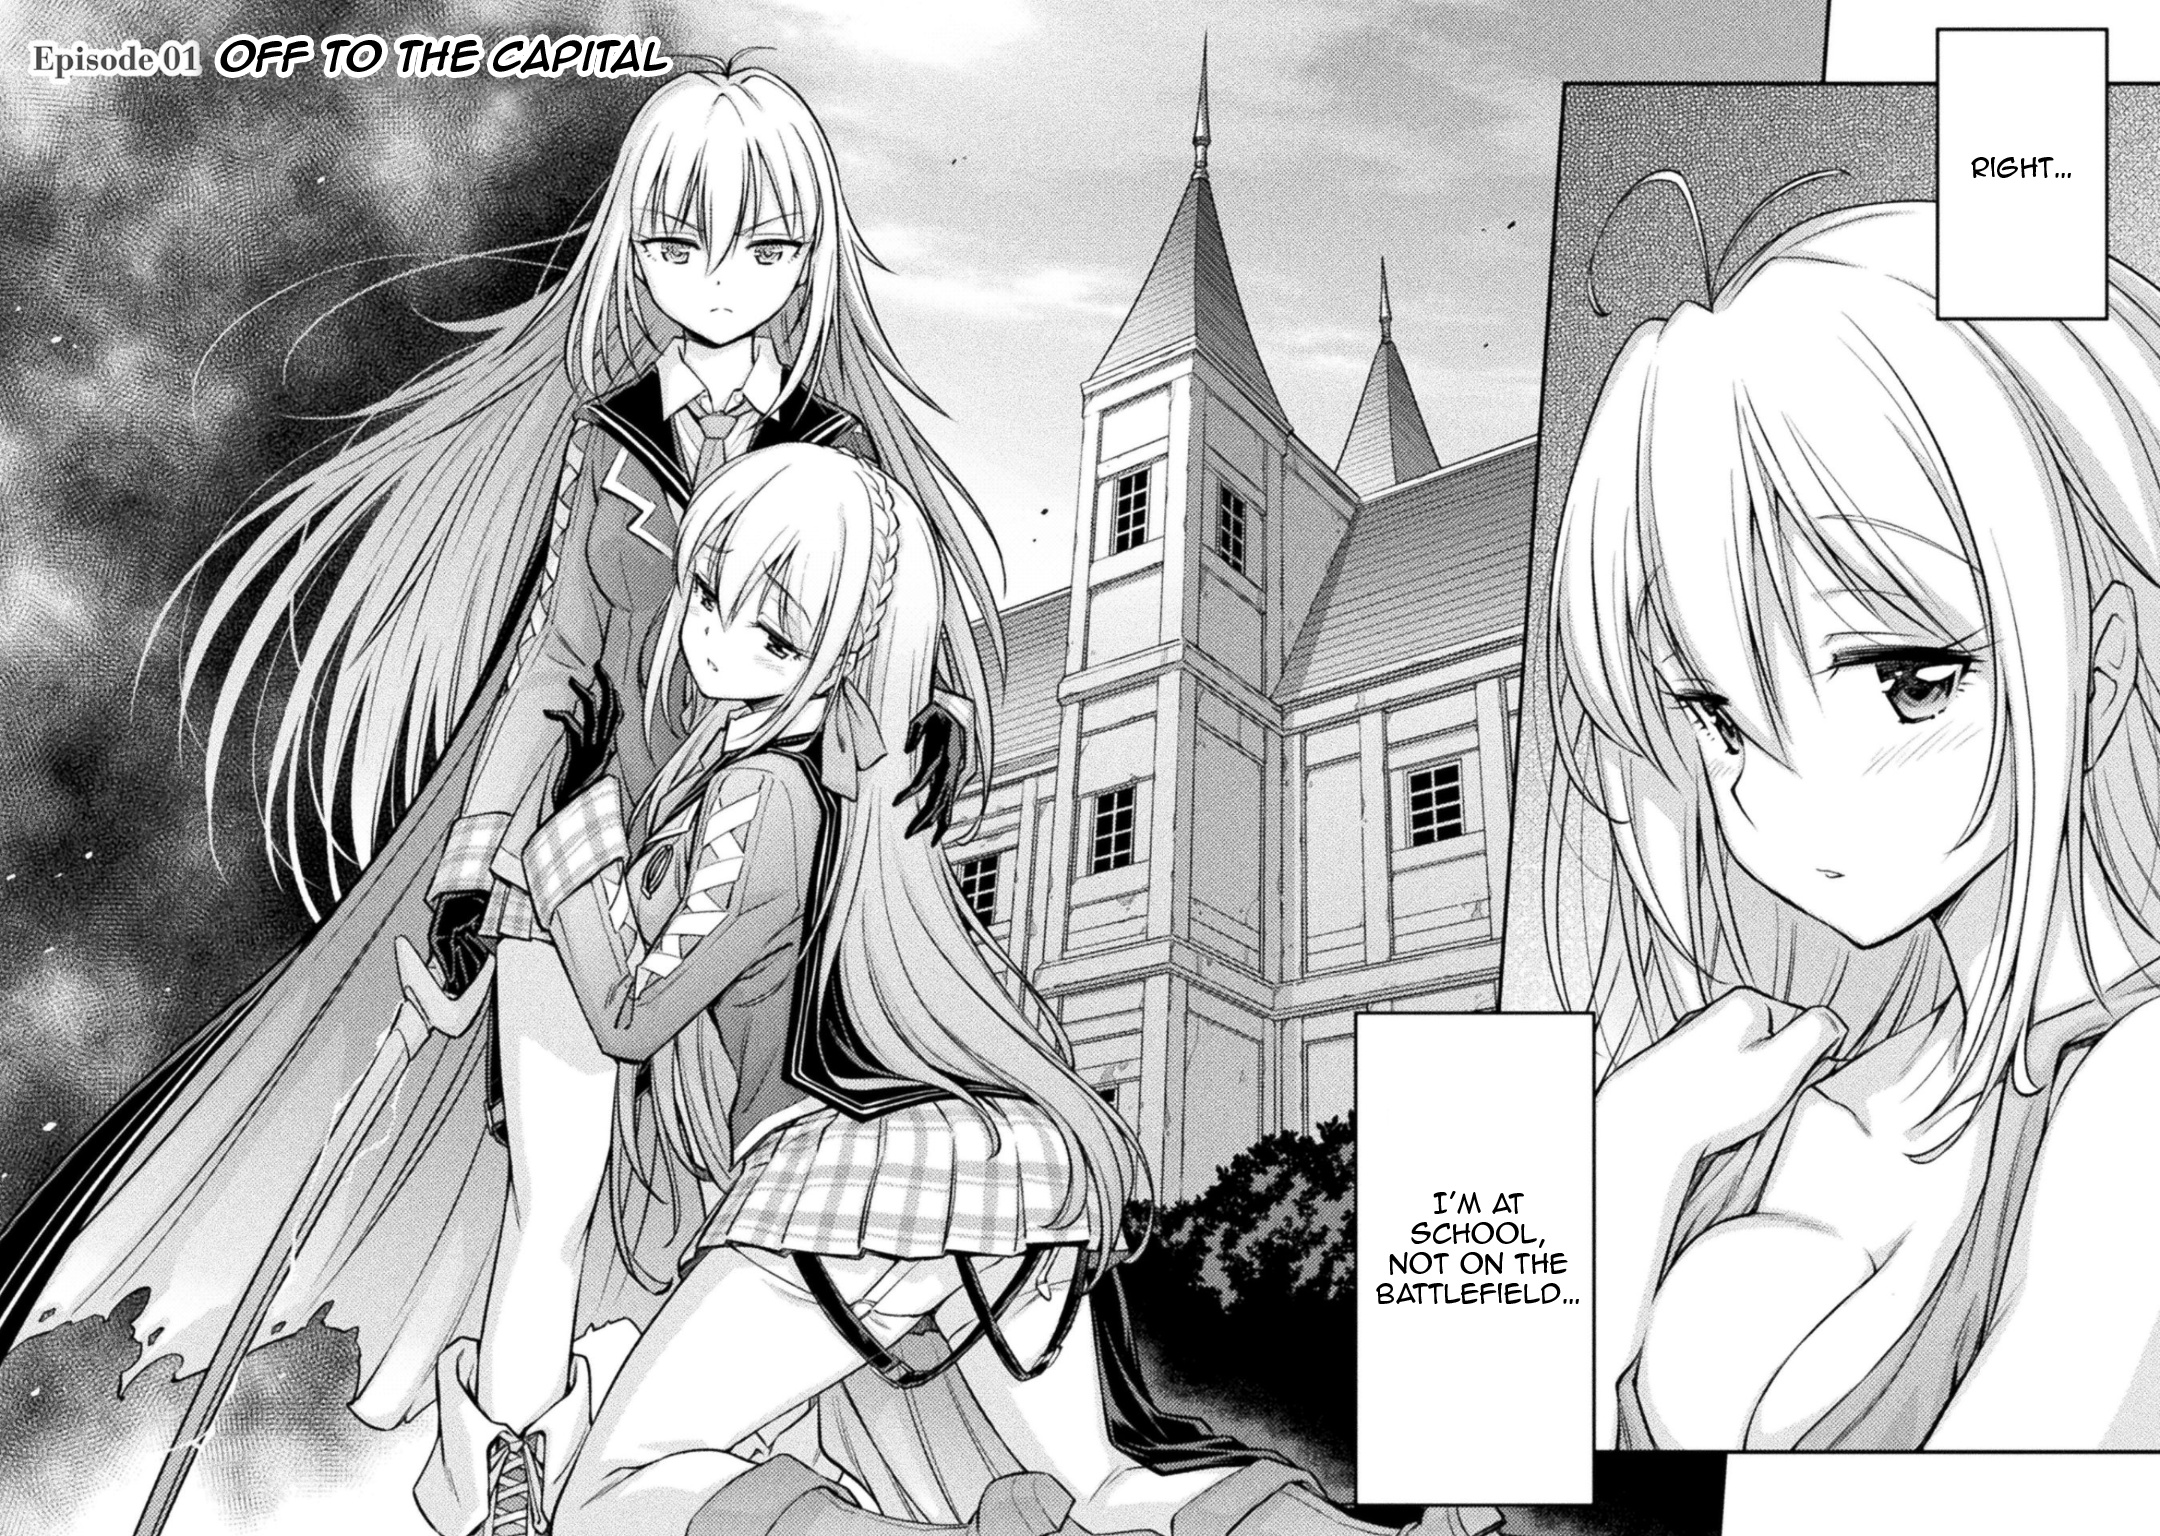 School Life Of A Mercenary Girl Vol.1 Chapter 1: Off To The Capital - Picture 2